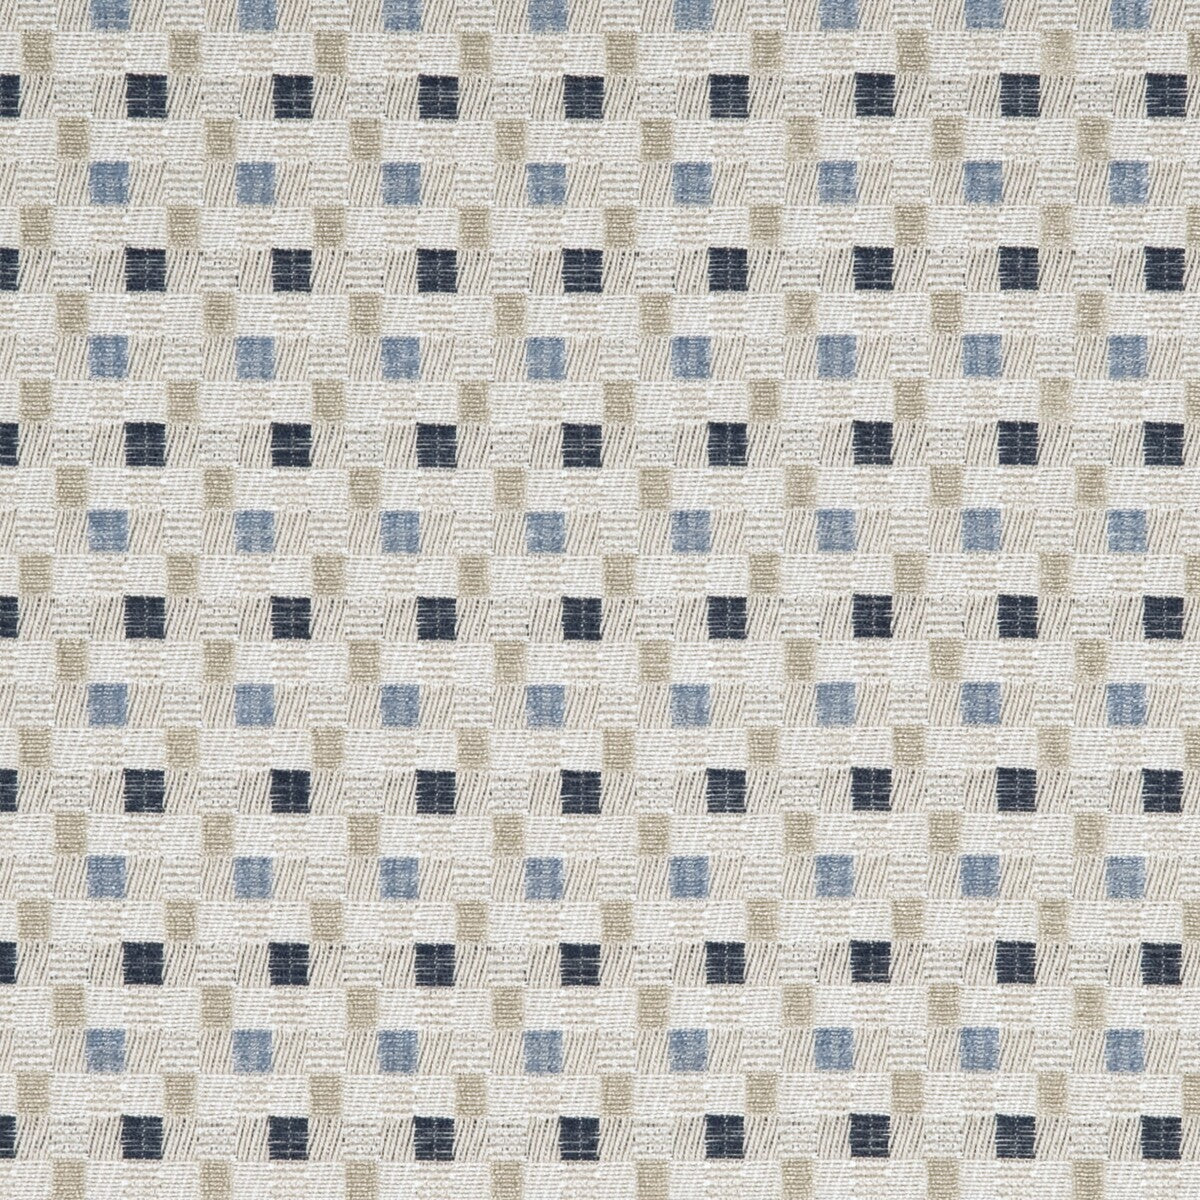 Skane fabric in ivory/stone/grey color - pattern PF50347.3.0 - by Baker Lifestyle in the Homes &amp; Gardens II collection